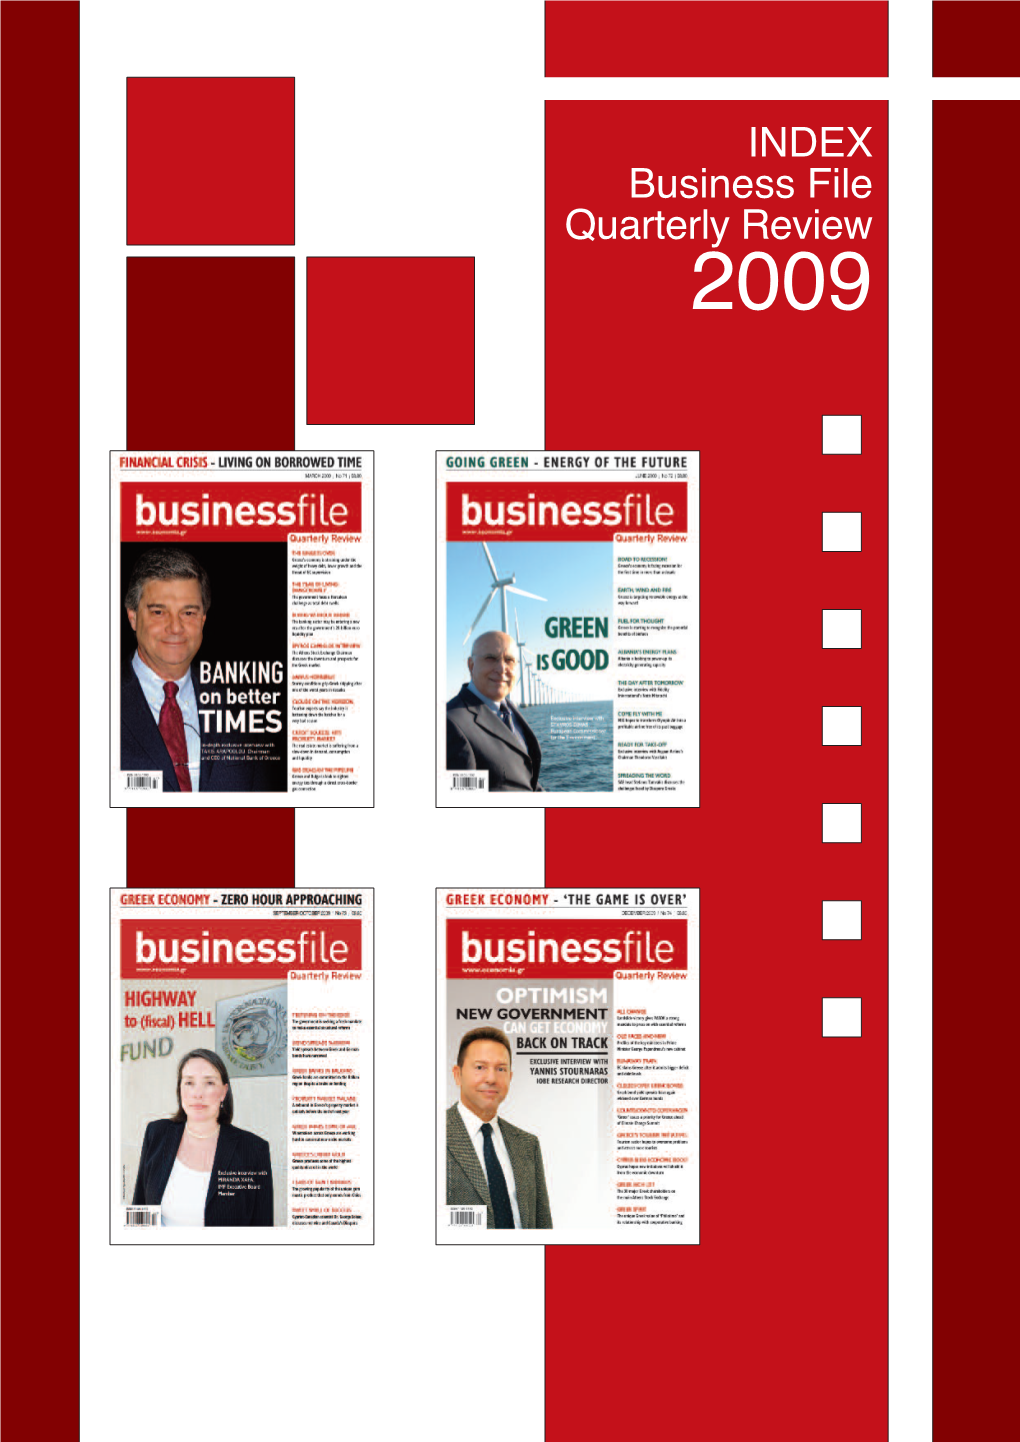 Business File Quarterly Review 2009 INDEX Business File Quarterly Review 2009